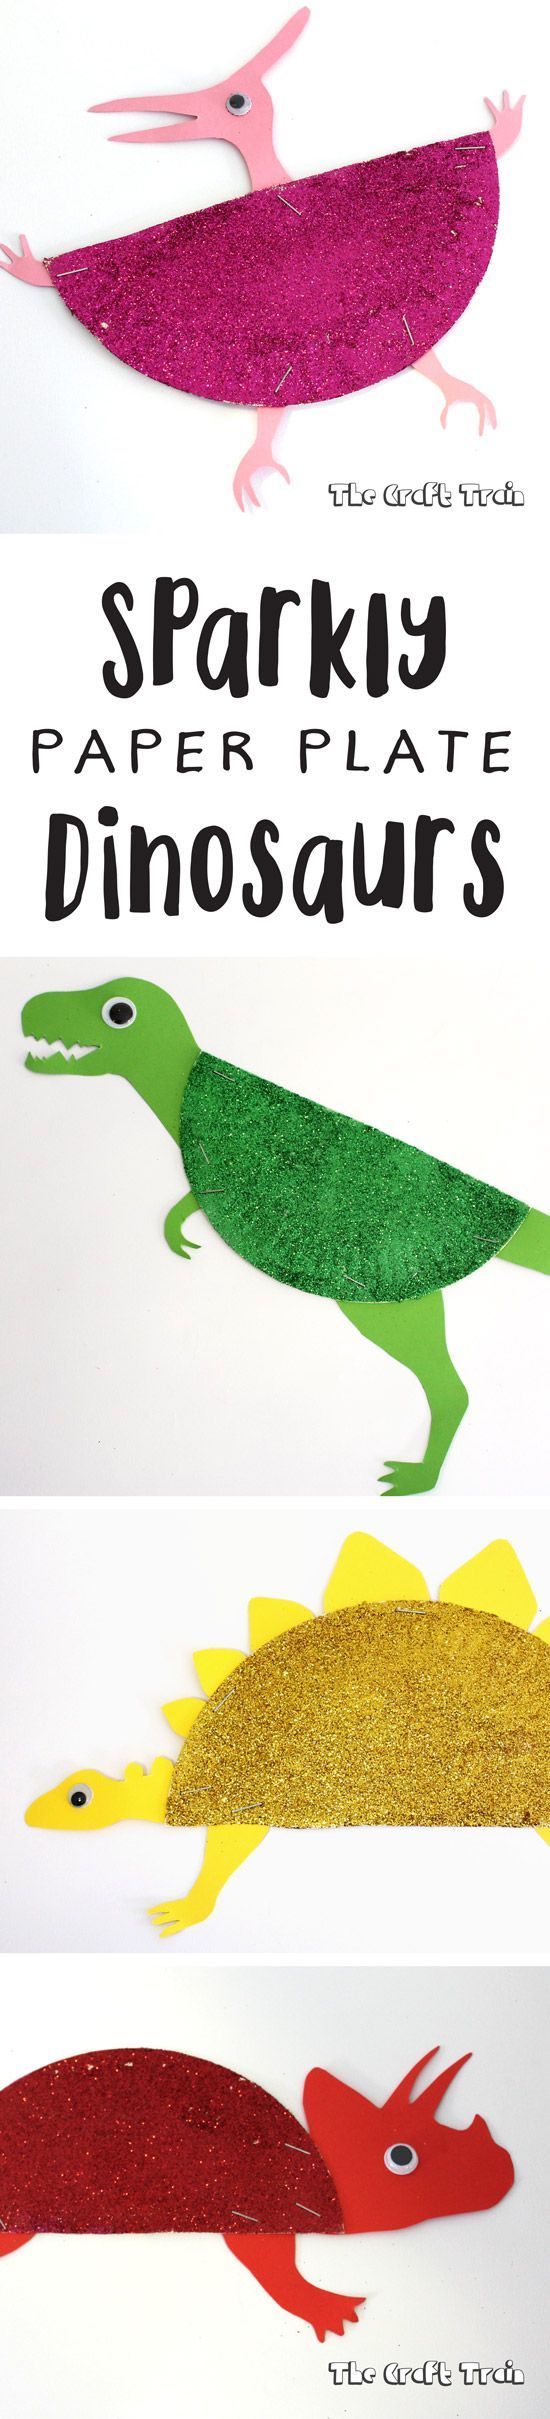 Sparkly paper plate dinosaur craft with free printable template